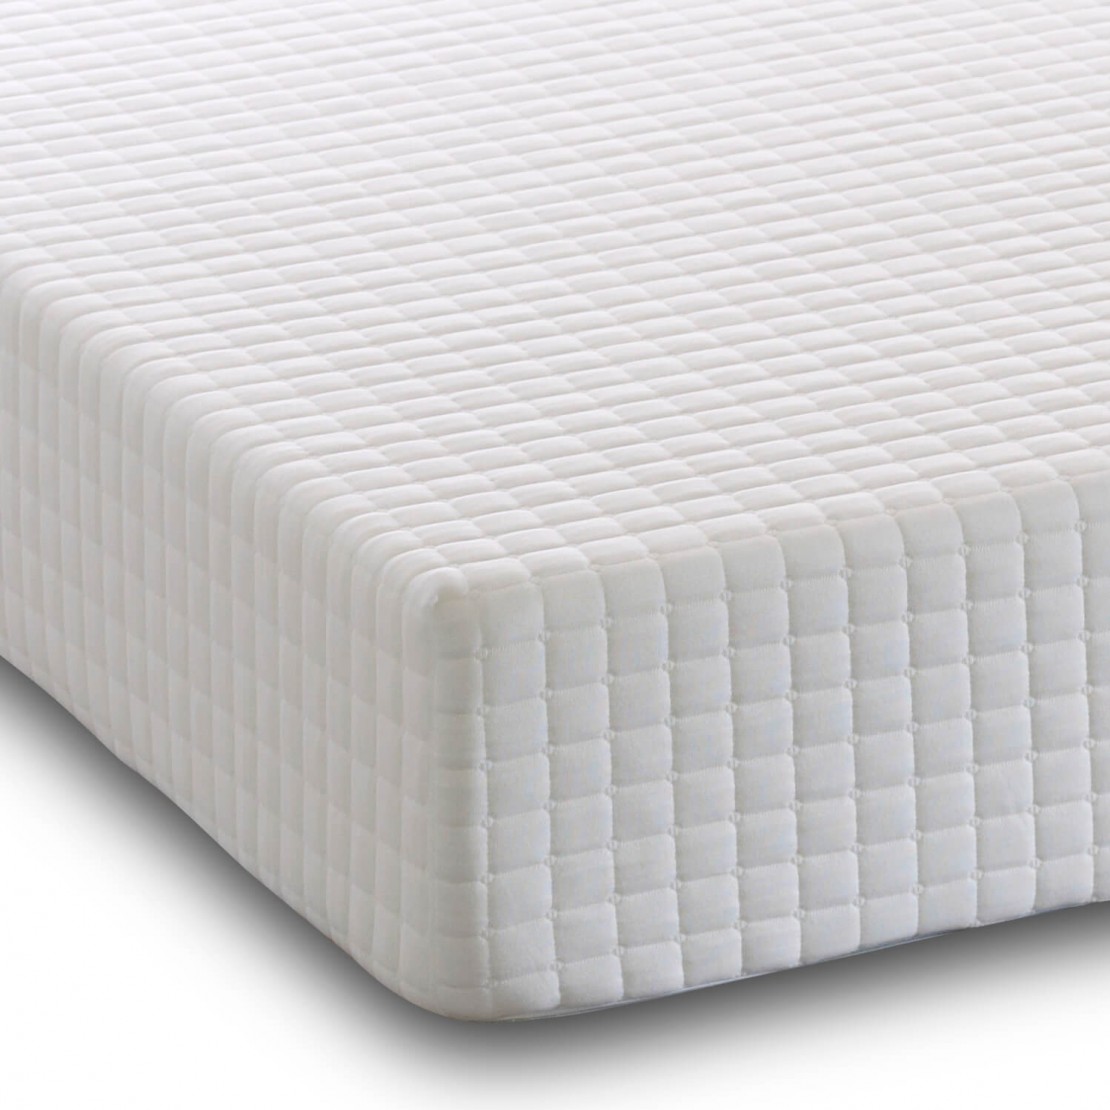 /_images/product-photos/visco-therapy-hl-2000-memory-foam-regular-mattress-a.jpg